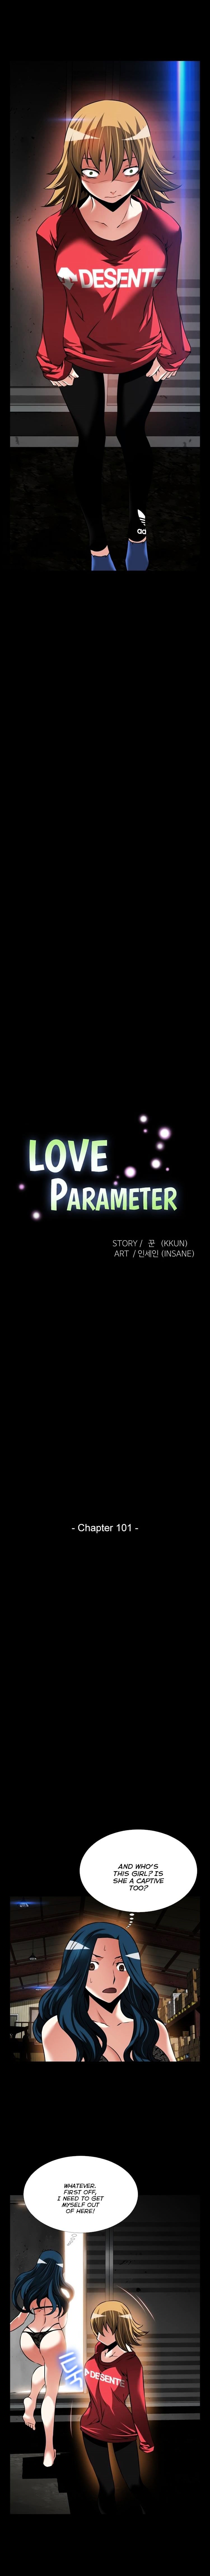 Love Parameter - Chapter 101 Page 2